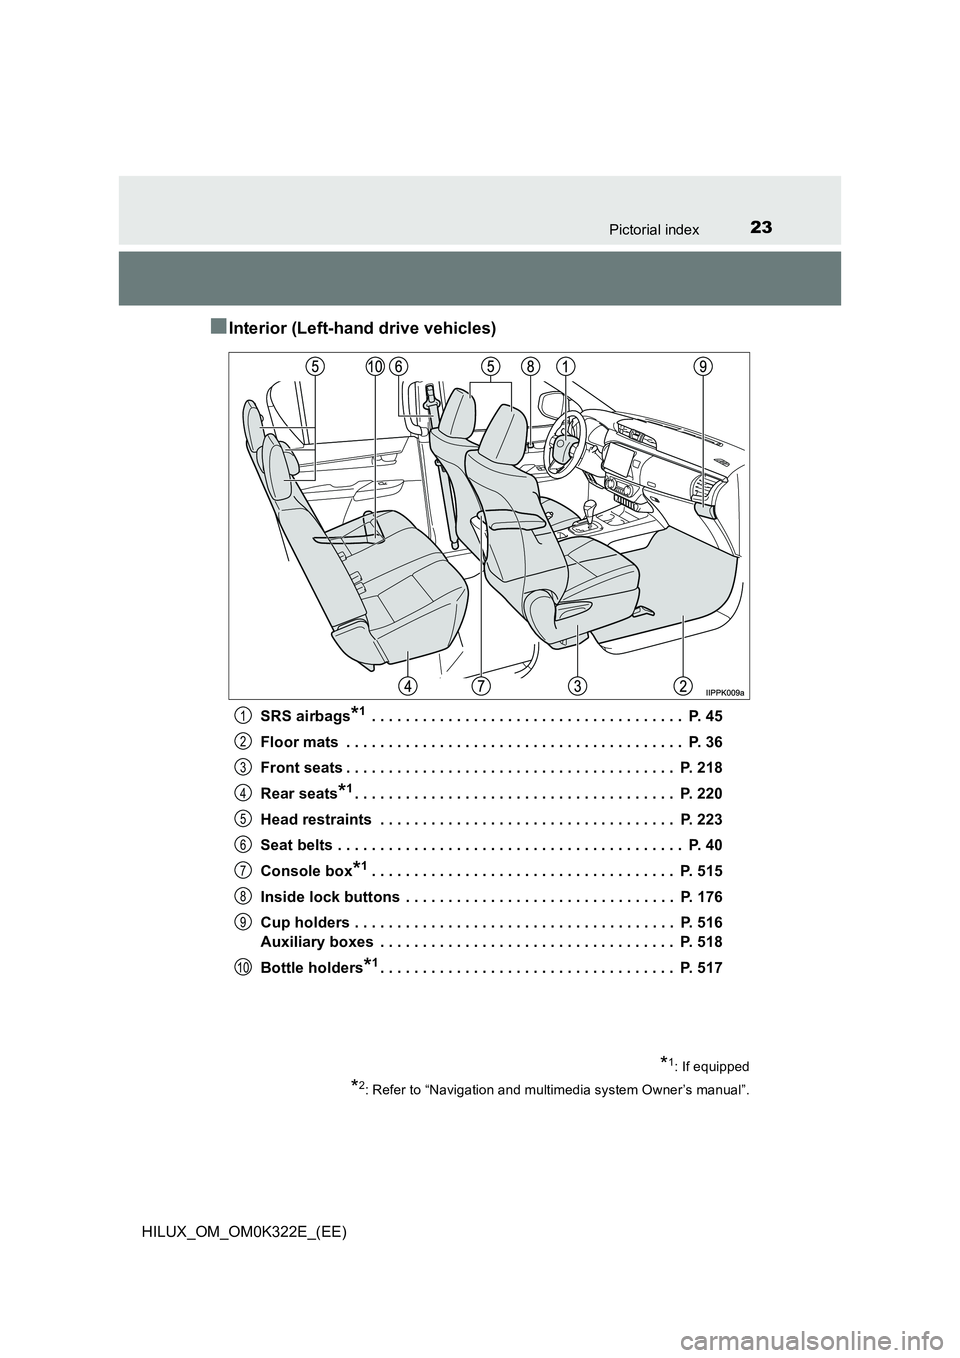 TOYOTA HILUX 2017  Owners Manual (in English) 23Pictorial index
HILUX_OM_OM0K322E_(EE)
■Interior (Left-hand drive vehicles)
SRS airbags*1 . . . . . . . . . . . . . . . . . . . . . . . . . . . . . . . . . . . . .  P. 45 
Floor mats  . . . . . . 